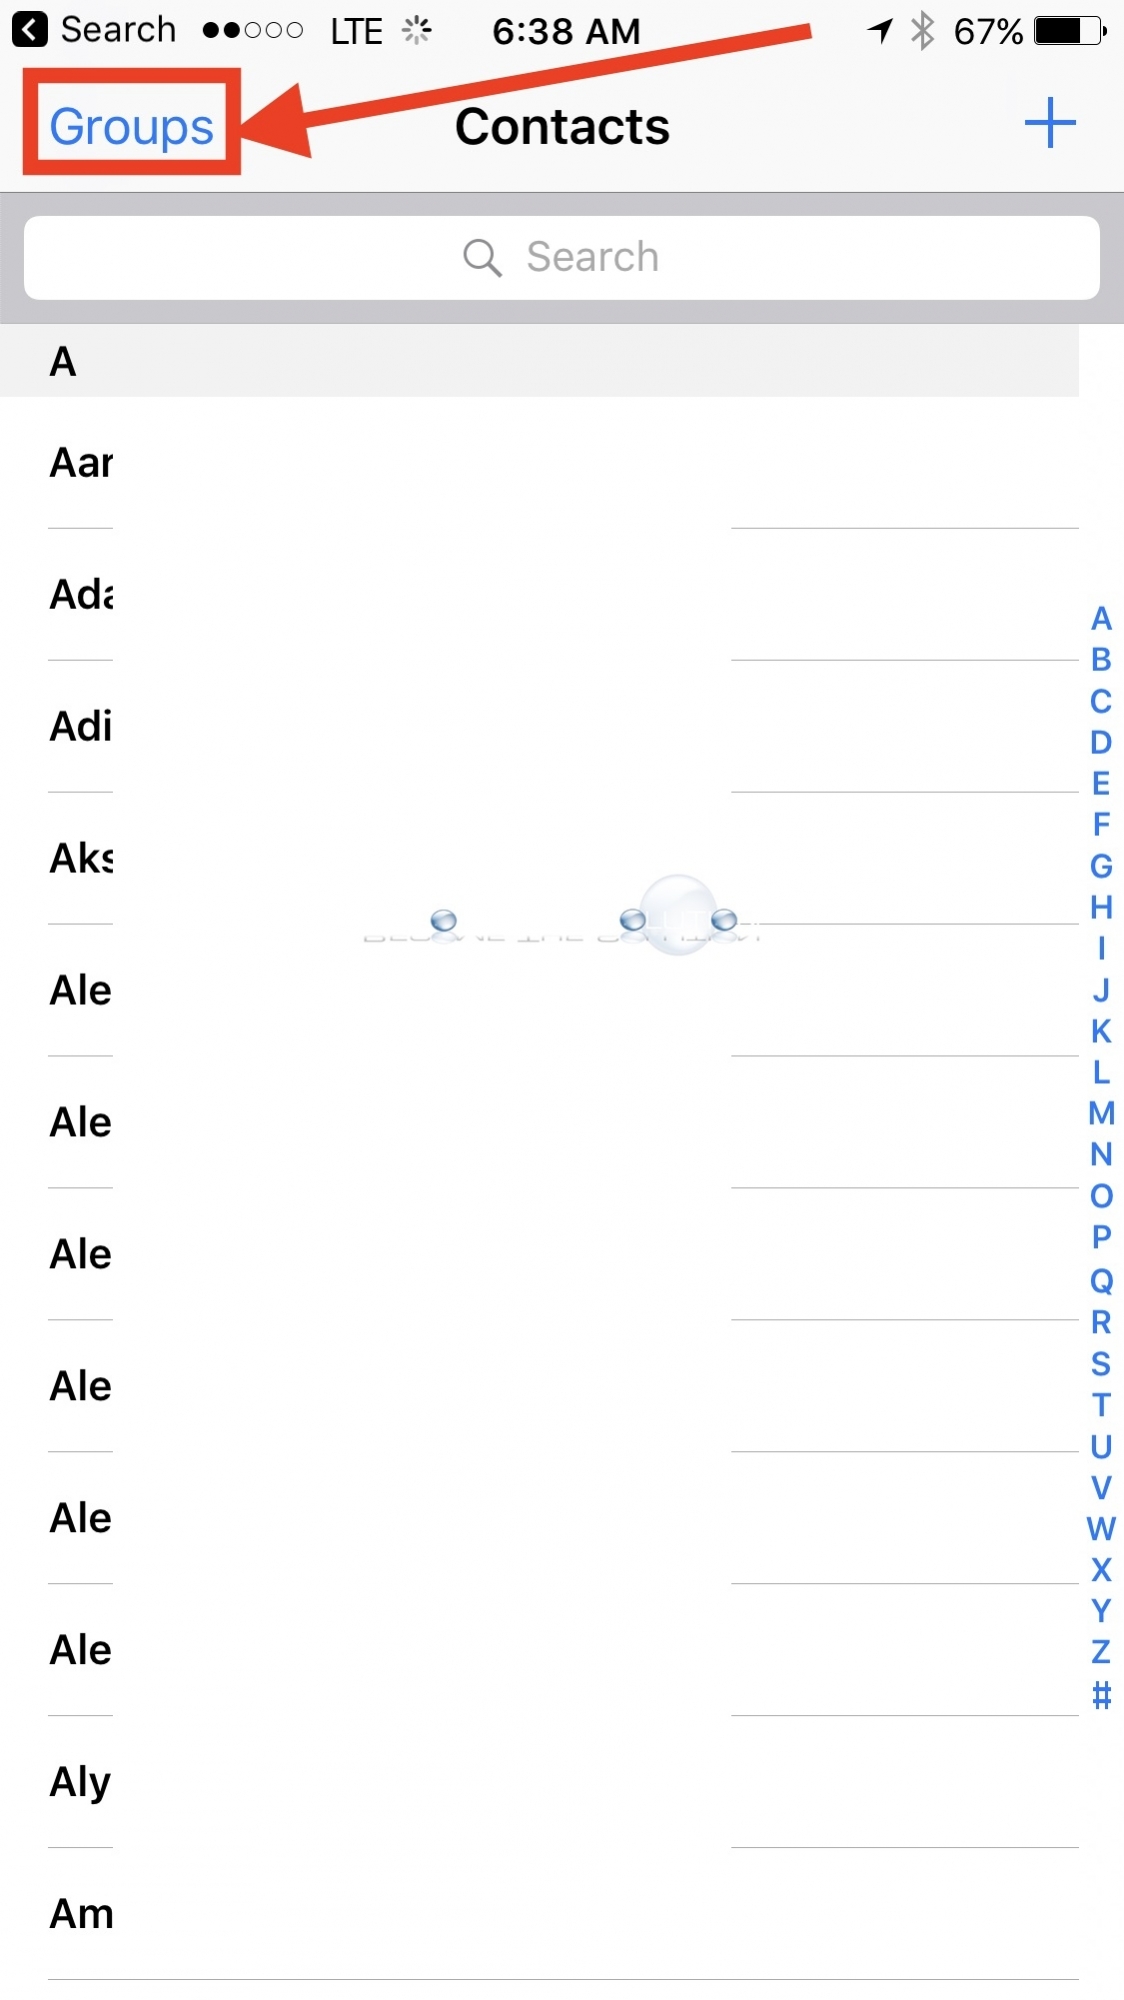 iPhone contact groups